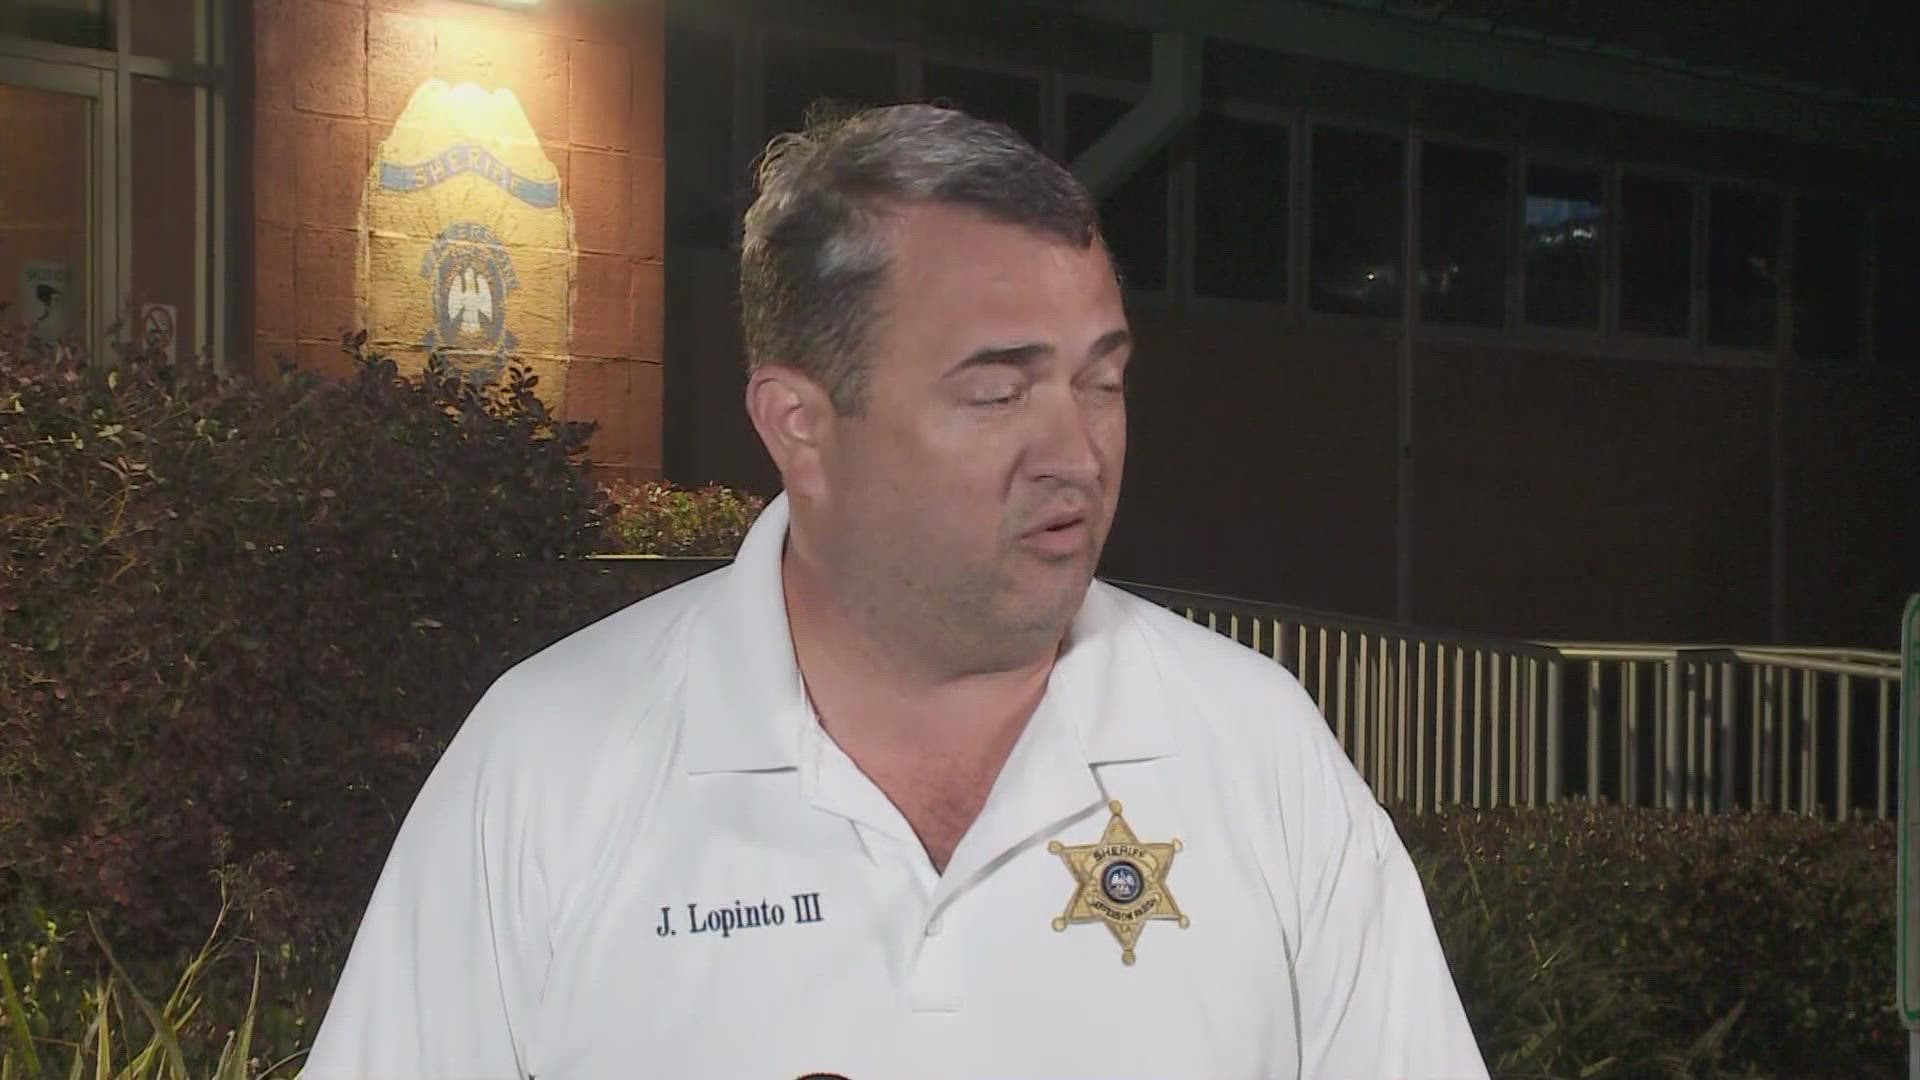 JP Sheriff Joe Lopinto said that two of his officers have been arrested on manslaughter charges after a shooting that left a man dead last week in Marrero.